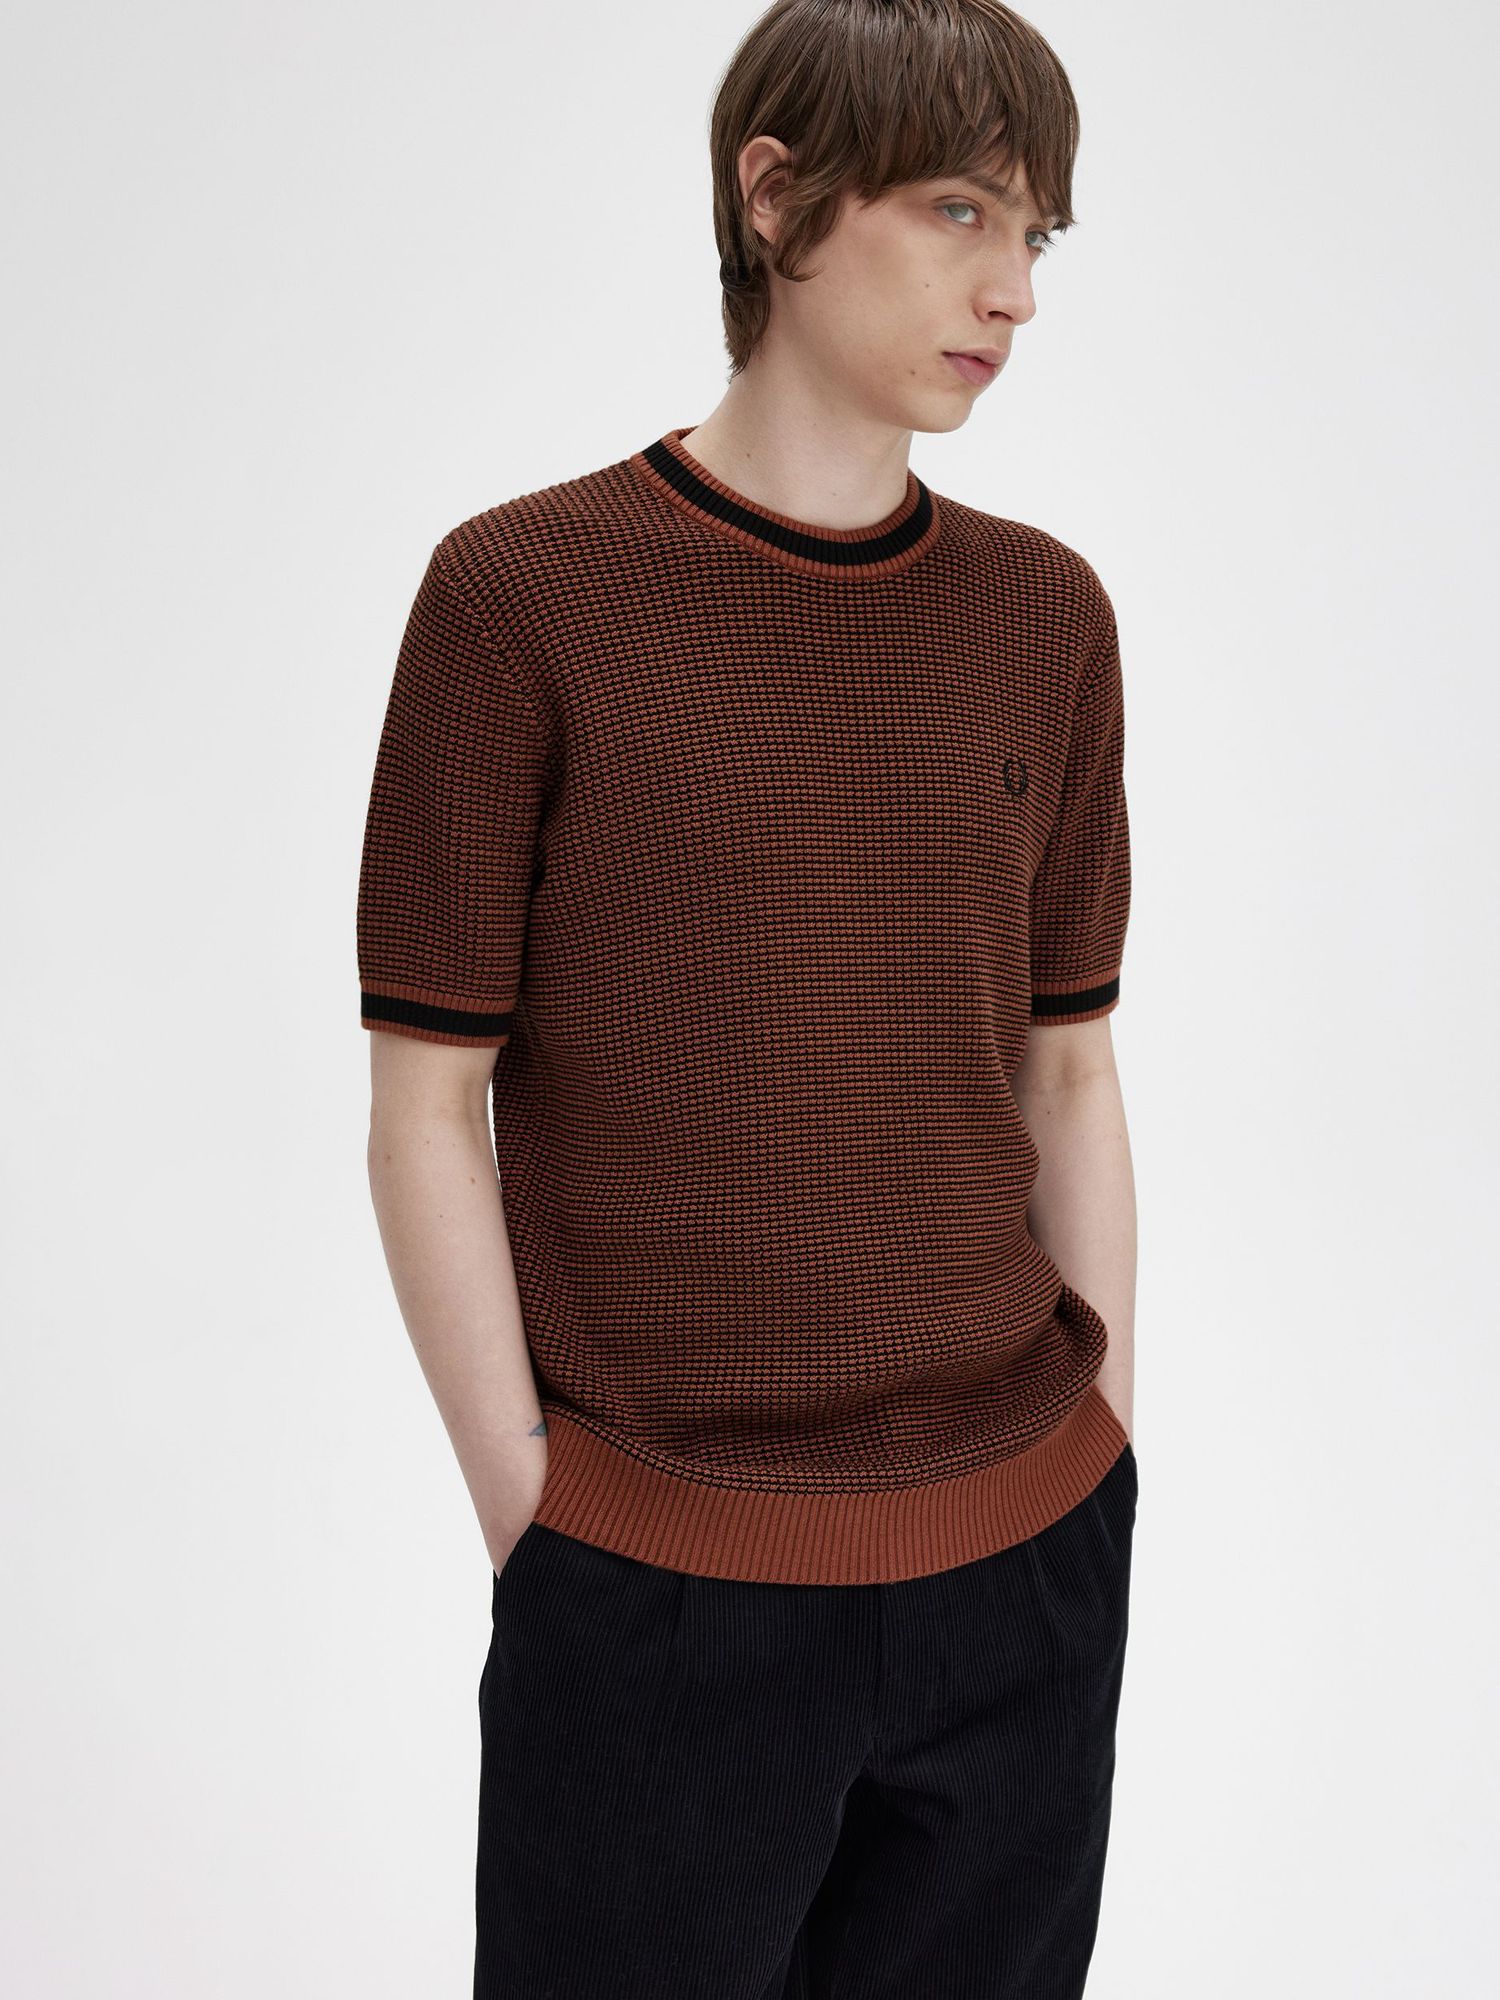 Fred Perry Stripe Knitted Cotton T-Shirt, Whiskey Brown, XL